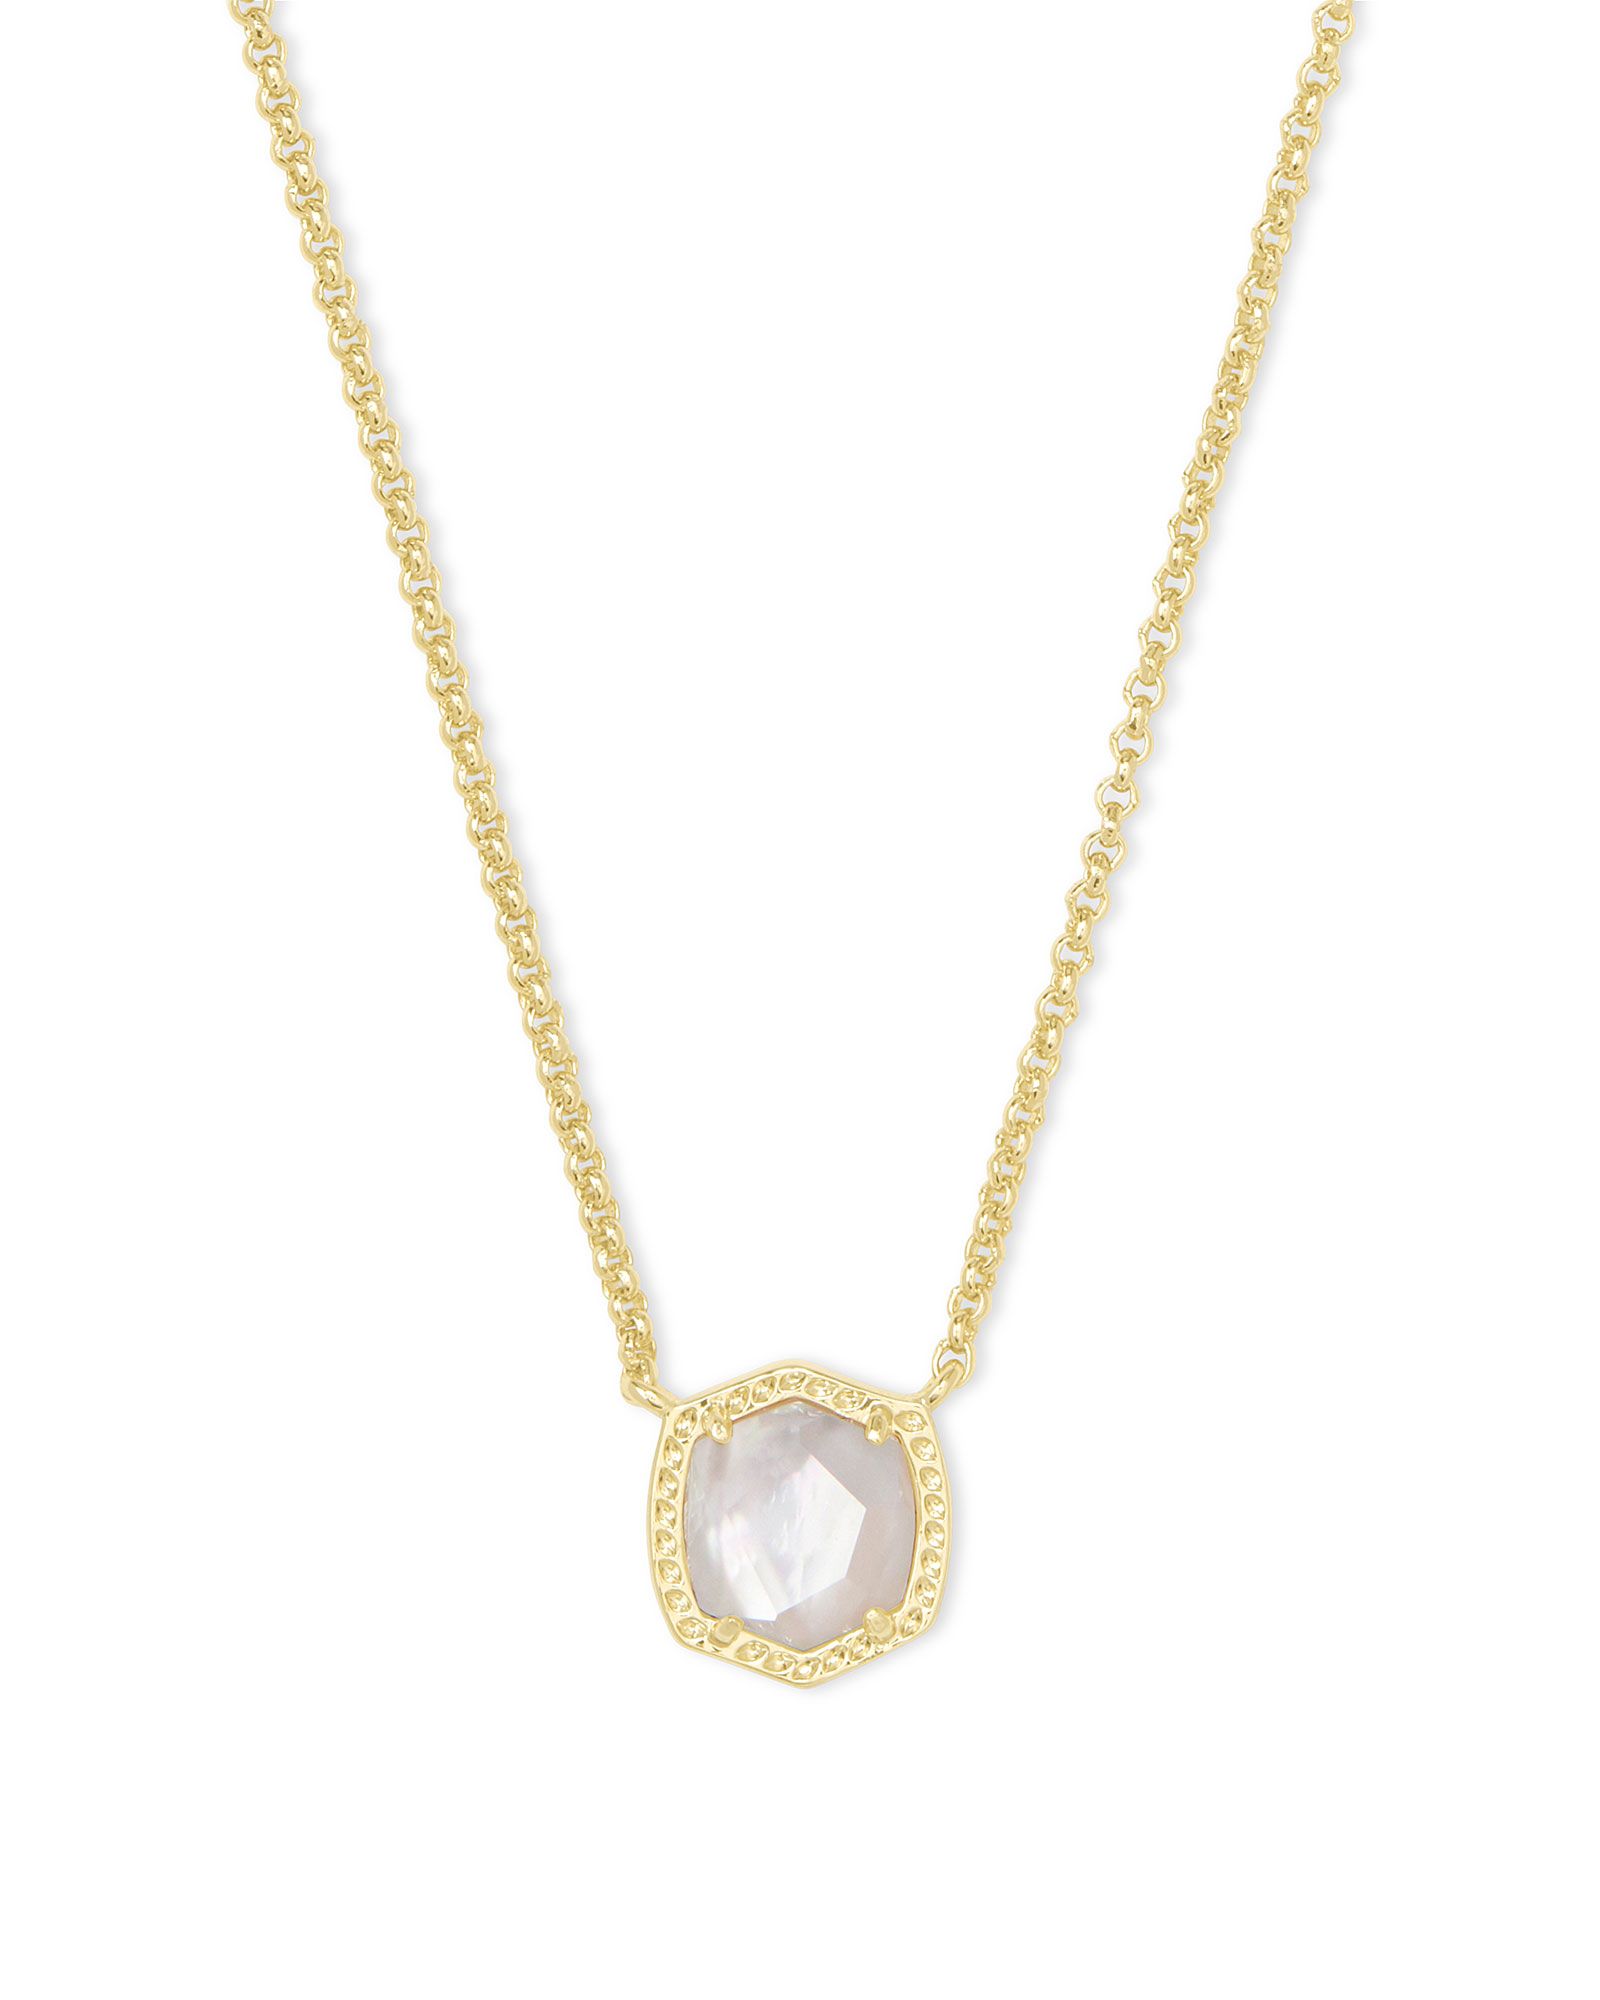 Davie Gold Pendant Necklace in Ivory Mother-of-Pearl | Kendra Scott | Kendra Scott